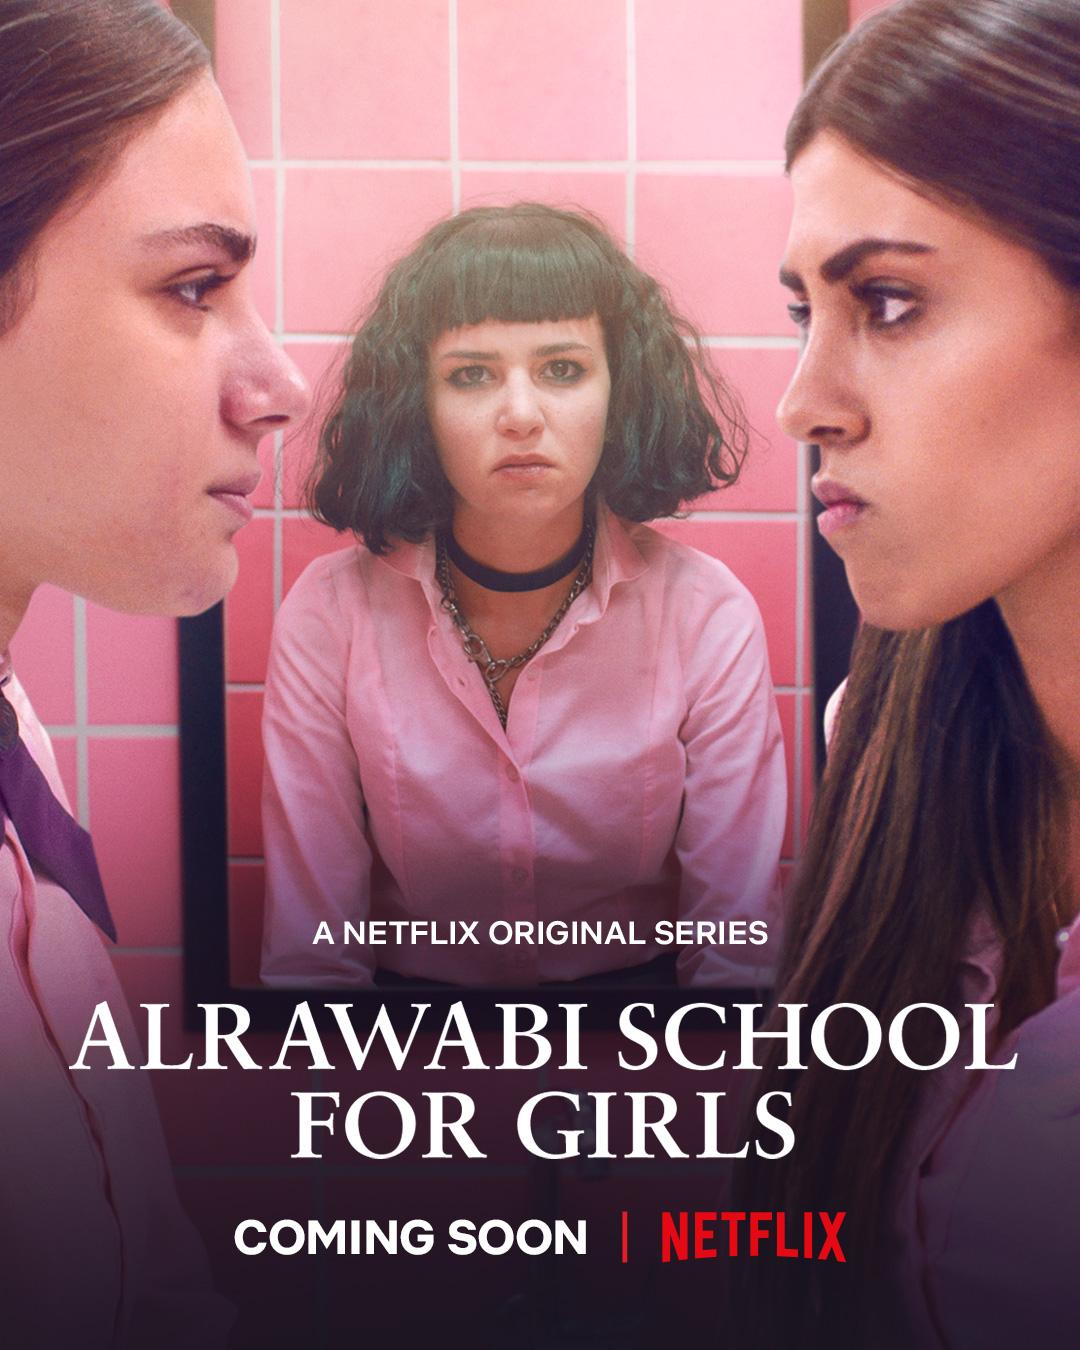 AlRawabi School for Girls season 2 (February 15) - Streaming on NetflixThe Jordanian teen drama returns for season 2 and continues to explore the impactful theme of bullying among young women in an elite private school. The show follows Mariam and her friends as they navigate the challenges of adolescence and deal with the repercussions of their actions aimed at seeking revenge against their bullies. The second season delves even deeper into the complexities of friendship, revenge, and the quest for empowerment.